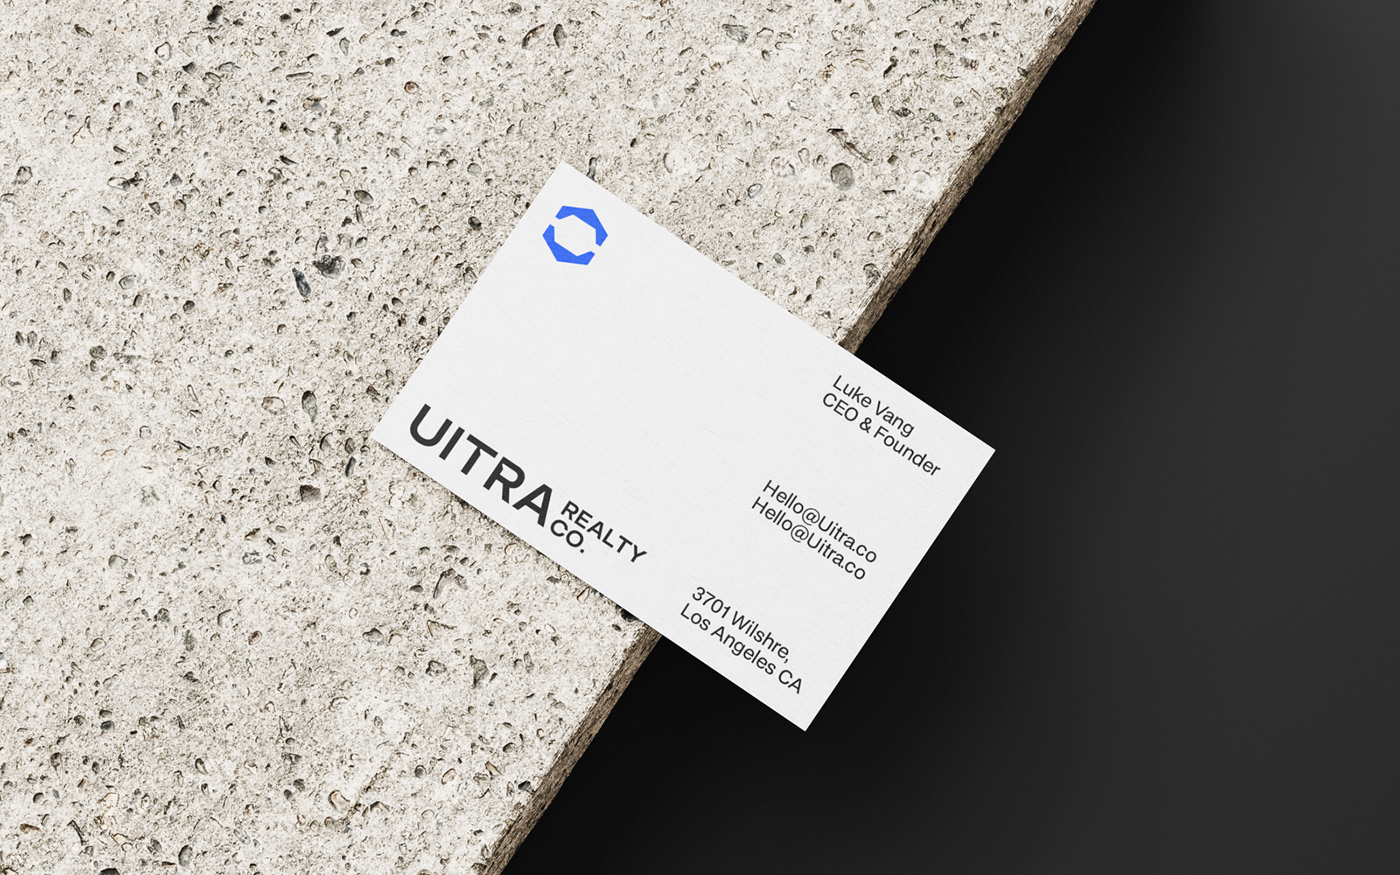 UITRA Realty Co. | Real Estate Visual & Branding Design
